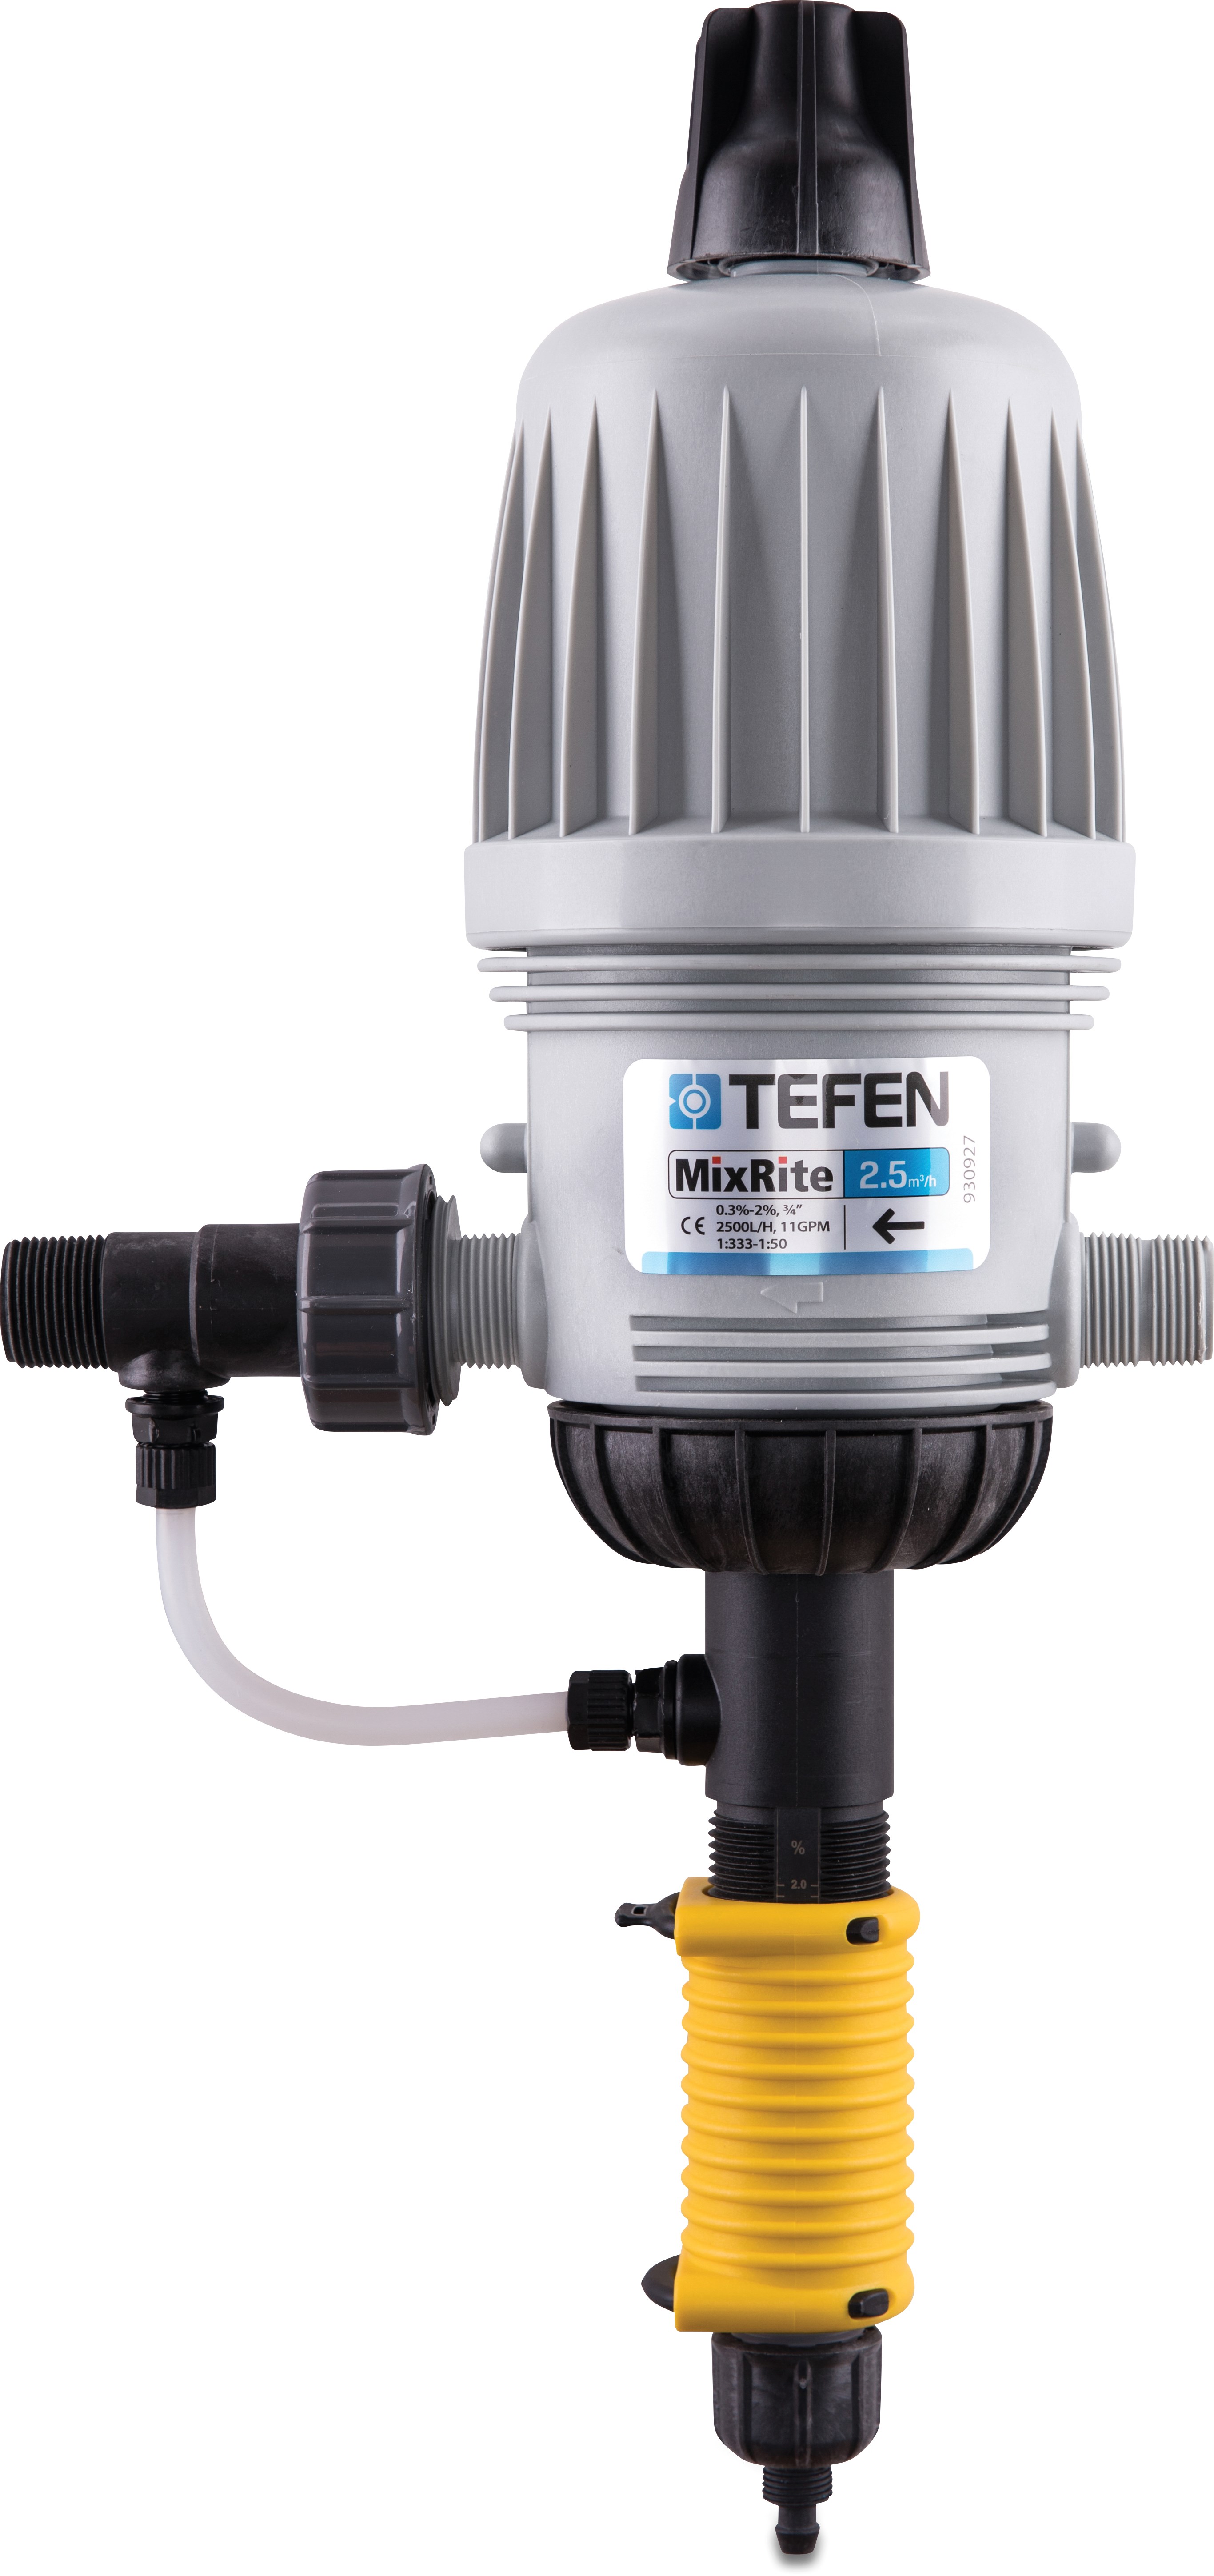 Tefen Dosing pump 3/4" x 10 mm x 3/4" male thread x hose tail x male thread type MixRite 2.5 On/Off external by-pass 0.3% - 2%